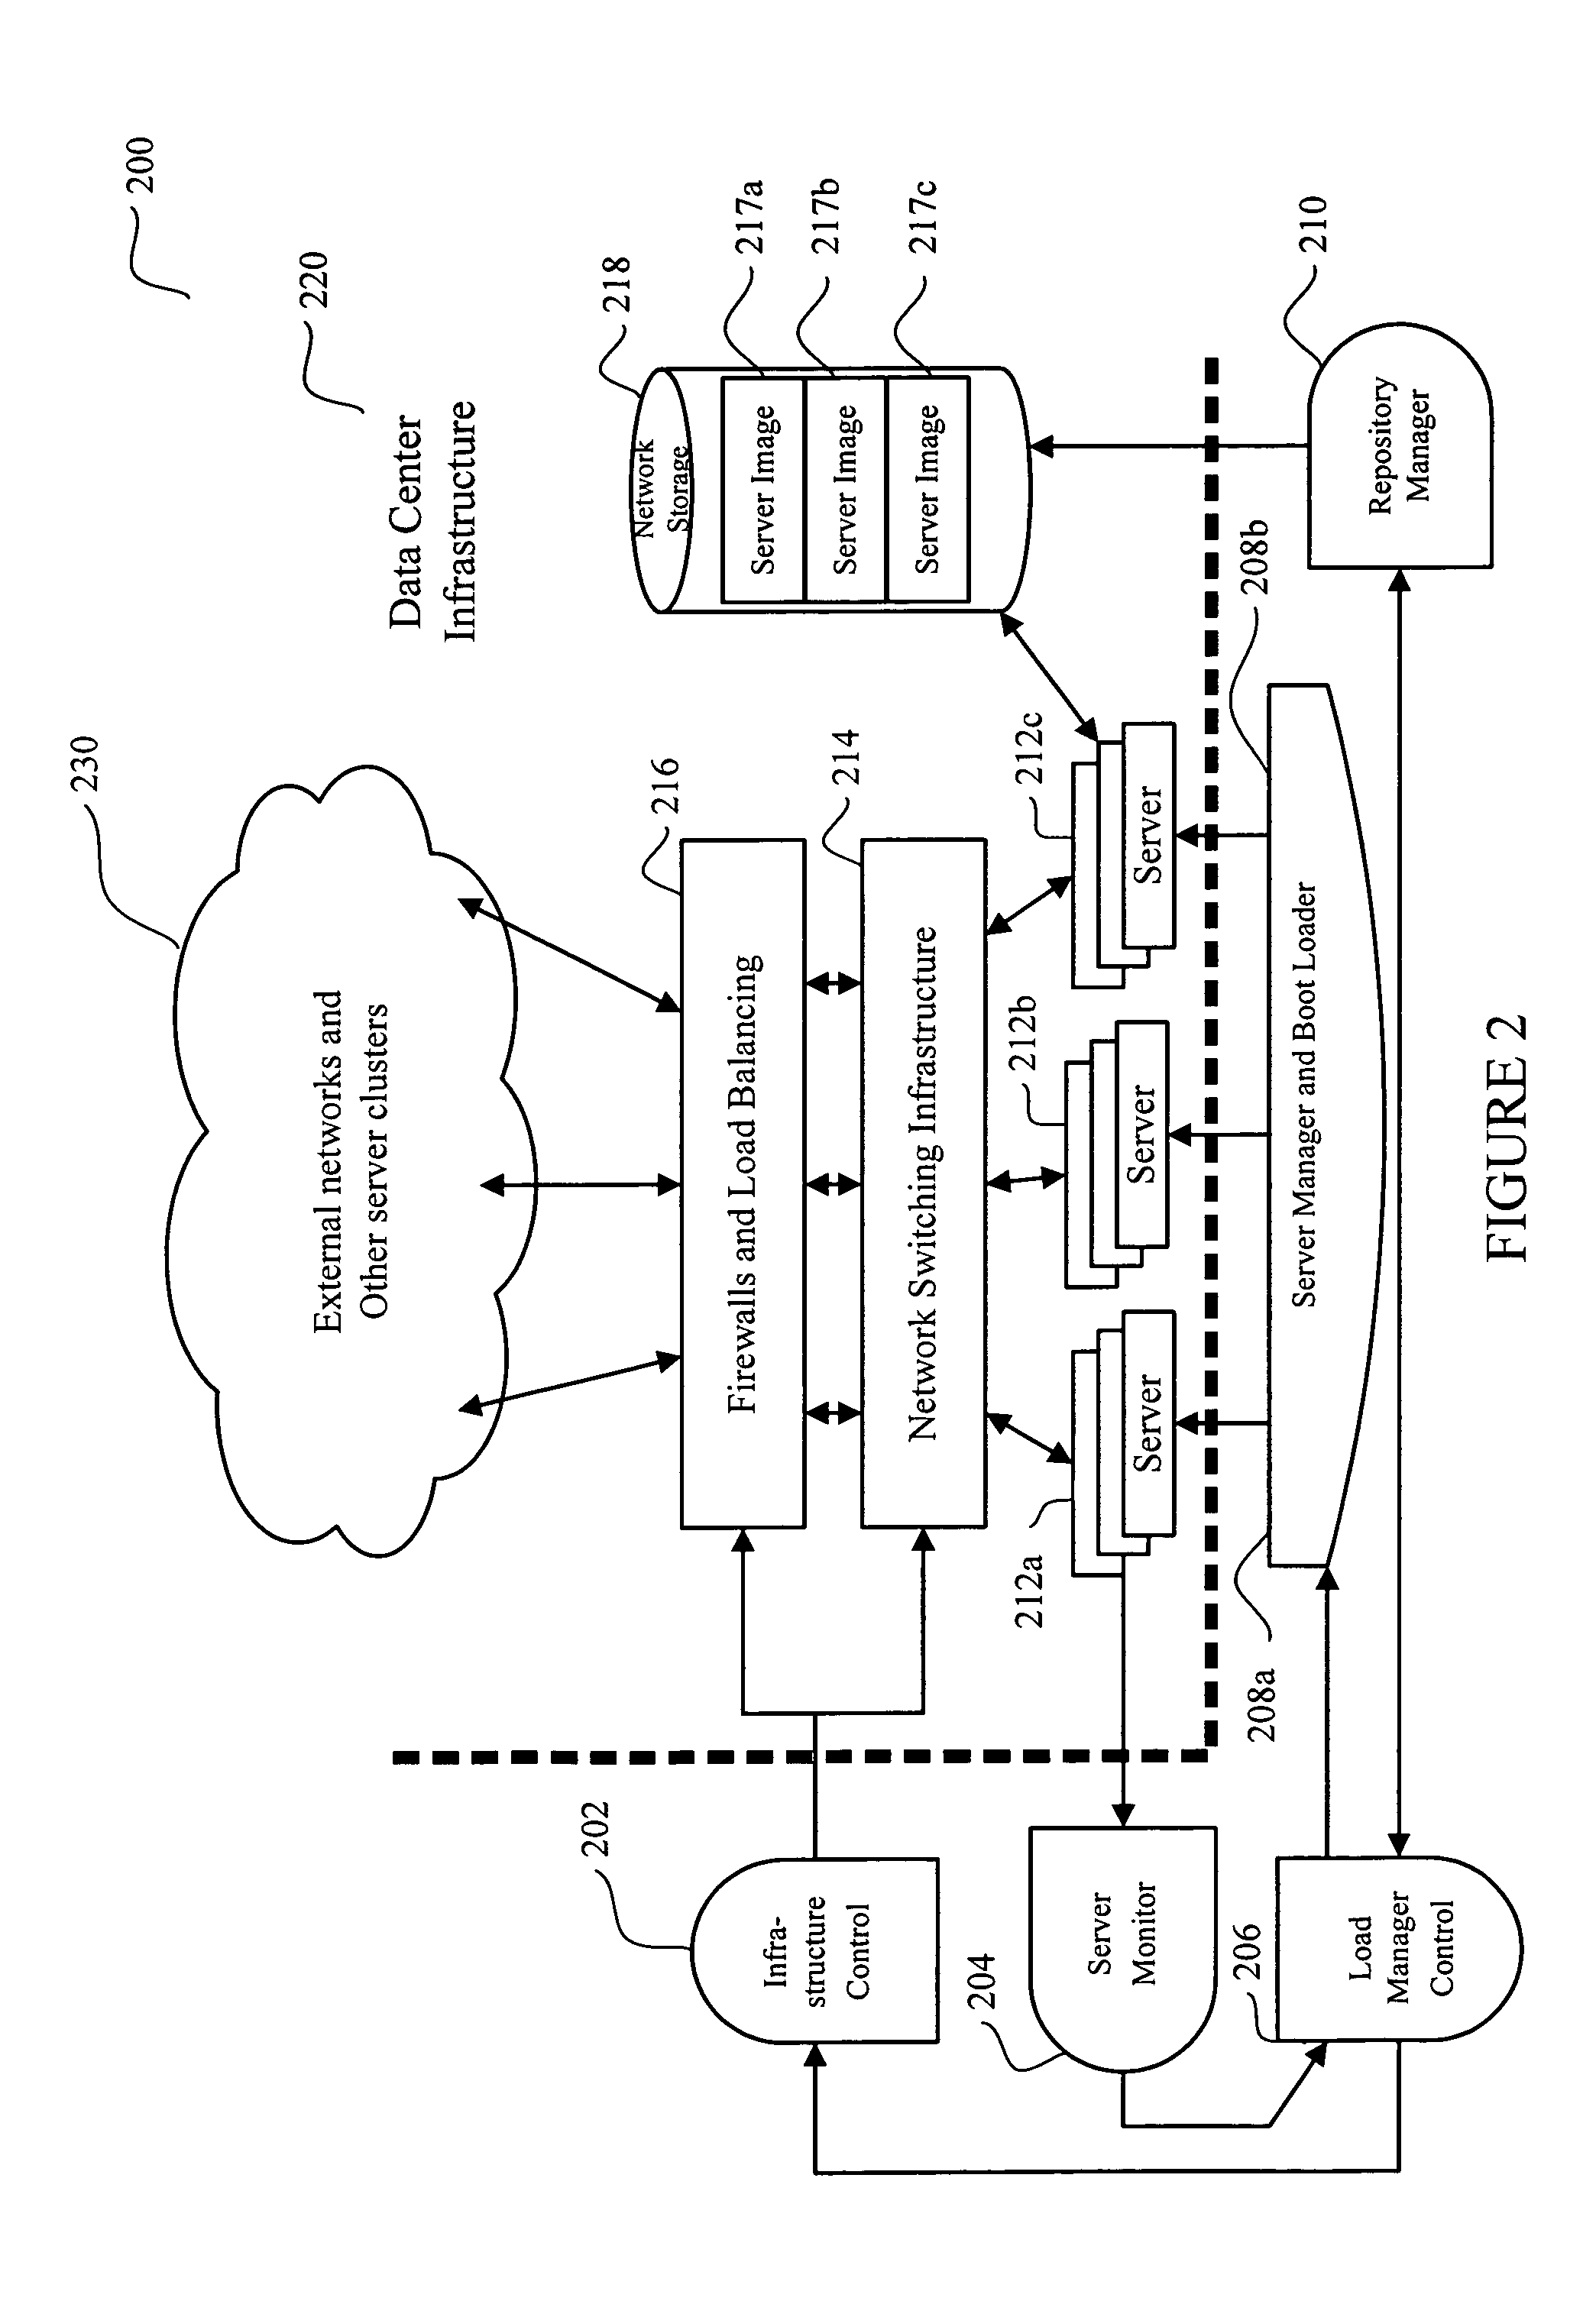 System and method for dynamic server allocation and provisioning